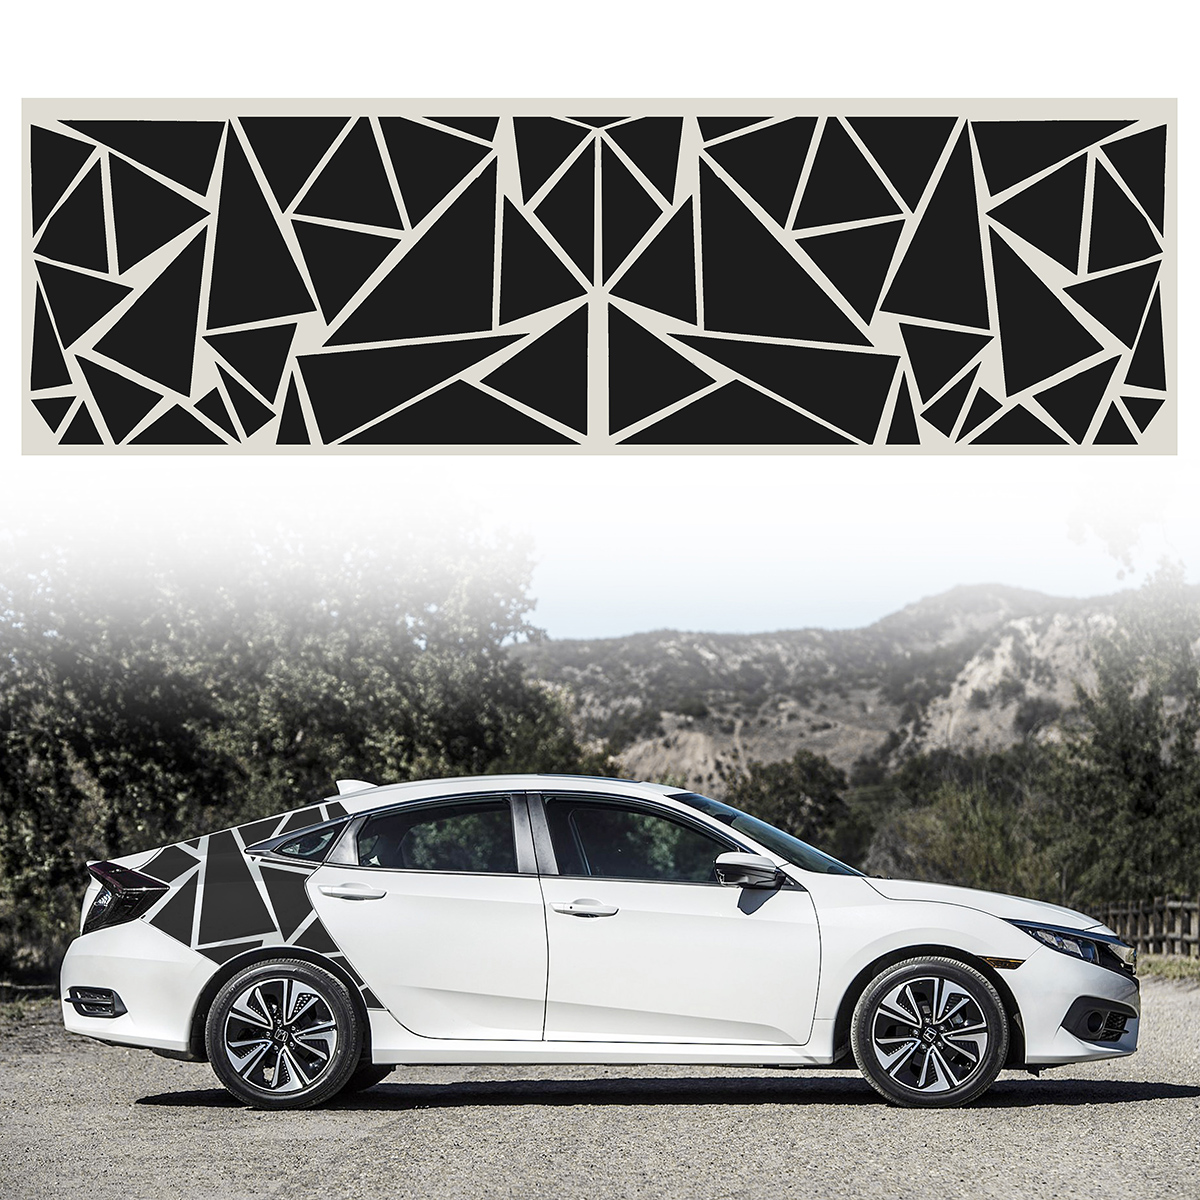 Find 200x60cm Car Side Body Sticker DIY Vinyl Decal Graphic Triangles for Sale on Gipsybee.com with cryptocurrencies